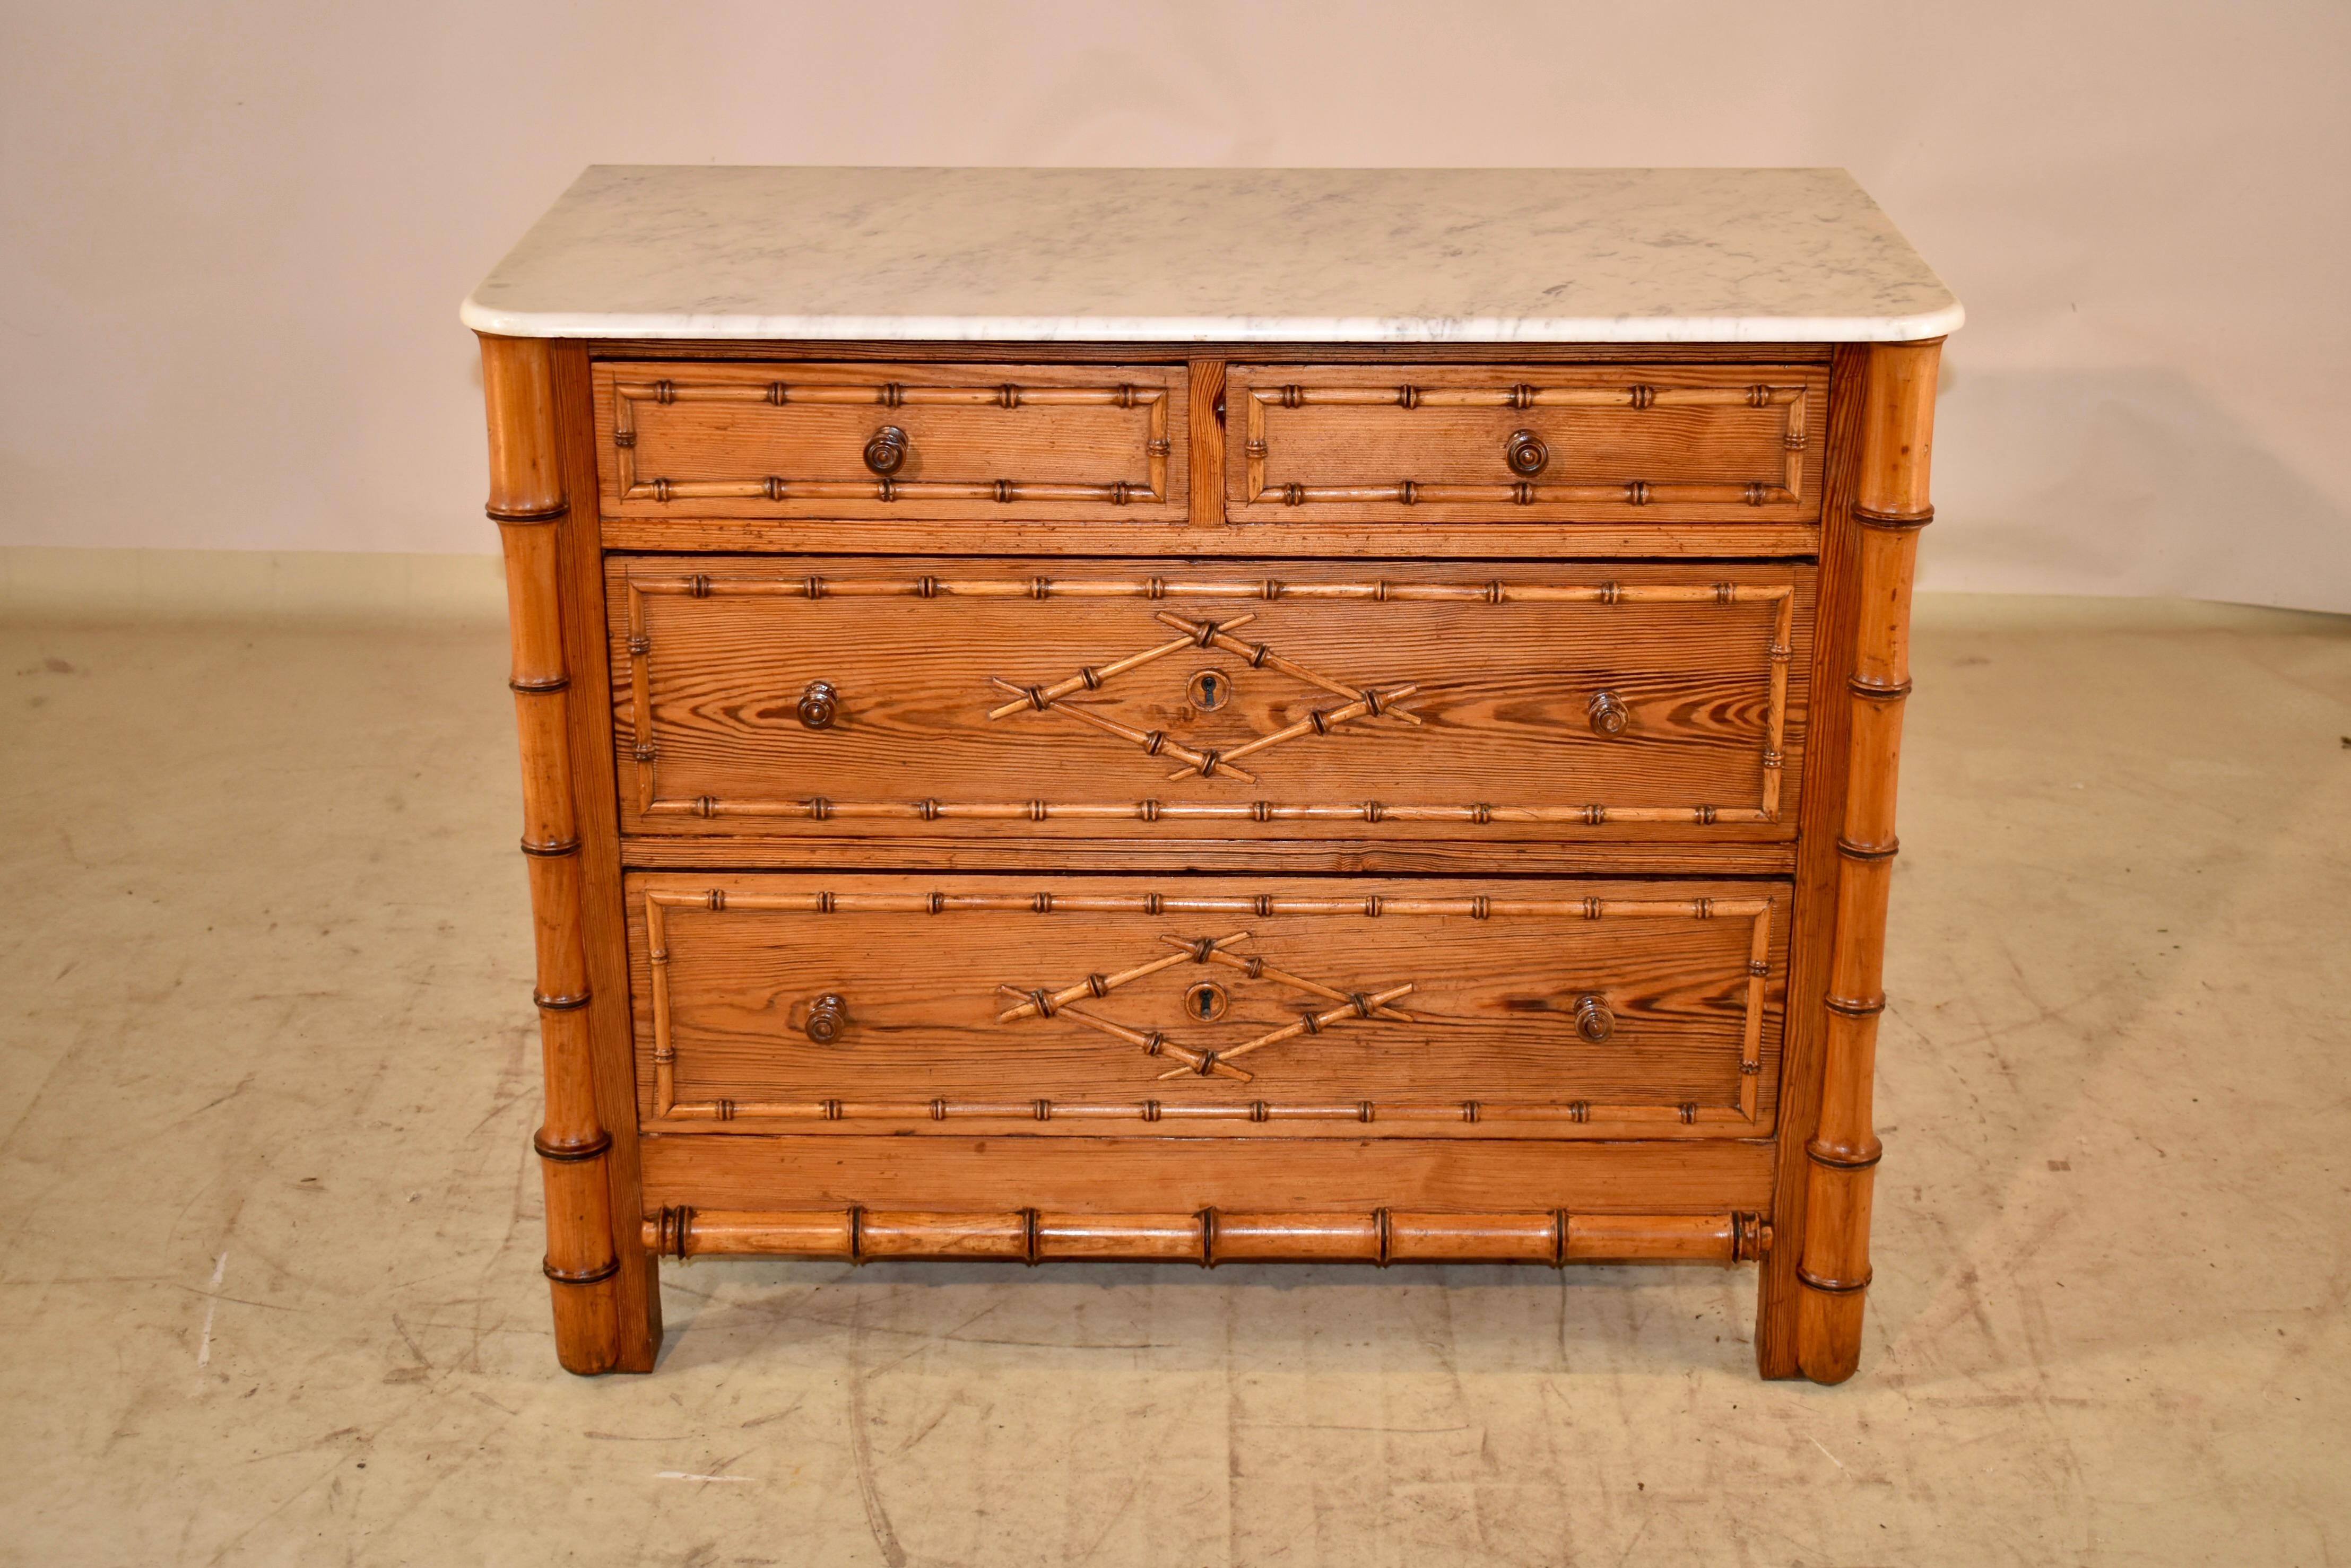 19th century faux bamboo chest of drawers from France.  The top is made from Carrara marble, and sits atop a case with simple paneled sides and faux bamboo molding at the bottom of the sides.  The front of the case has two drawers over two drawers,